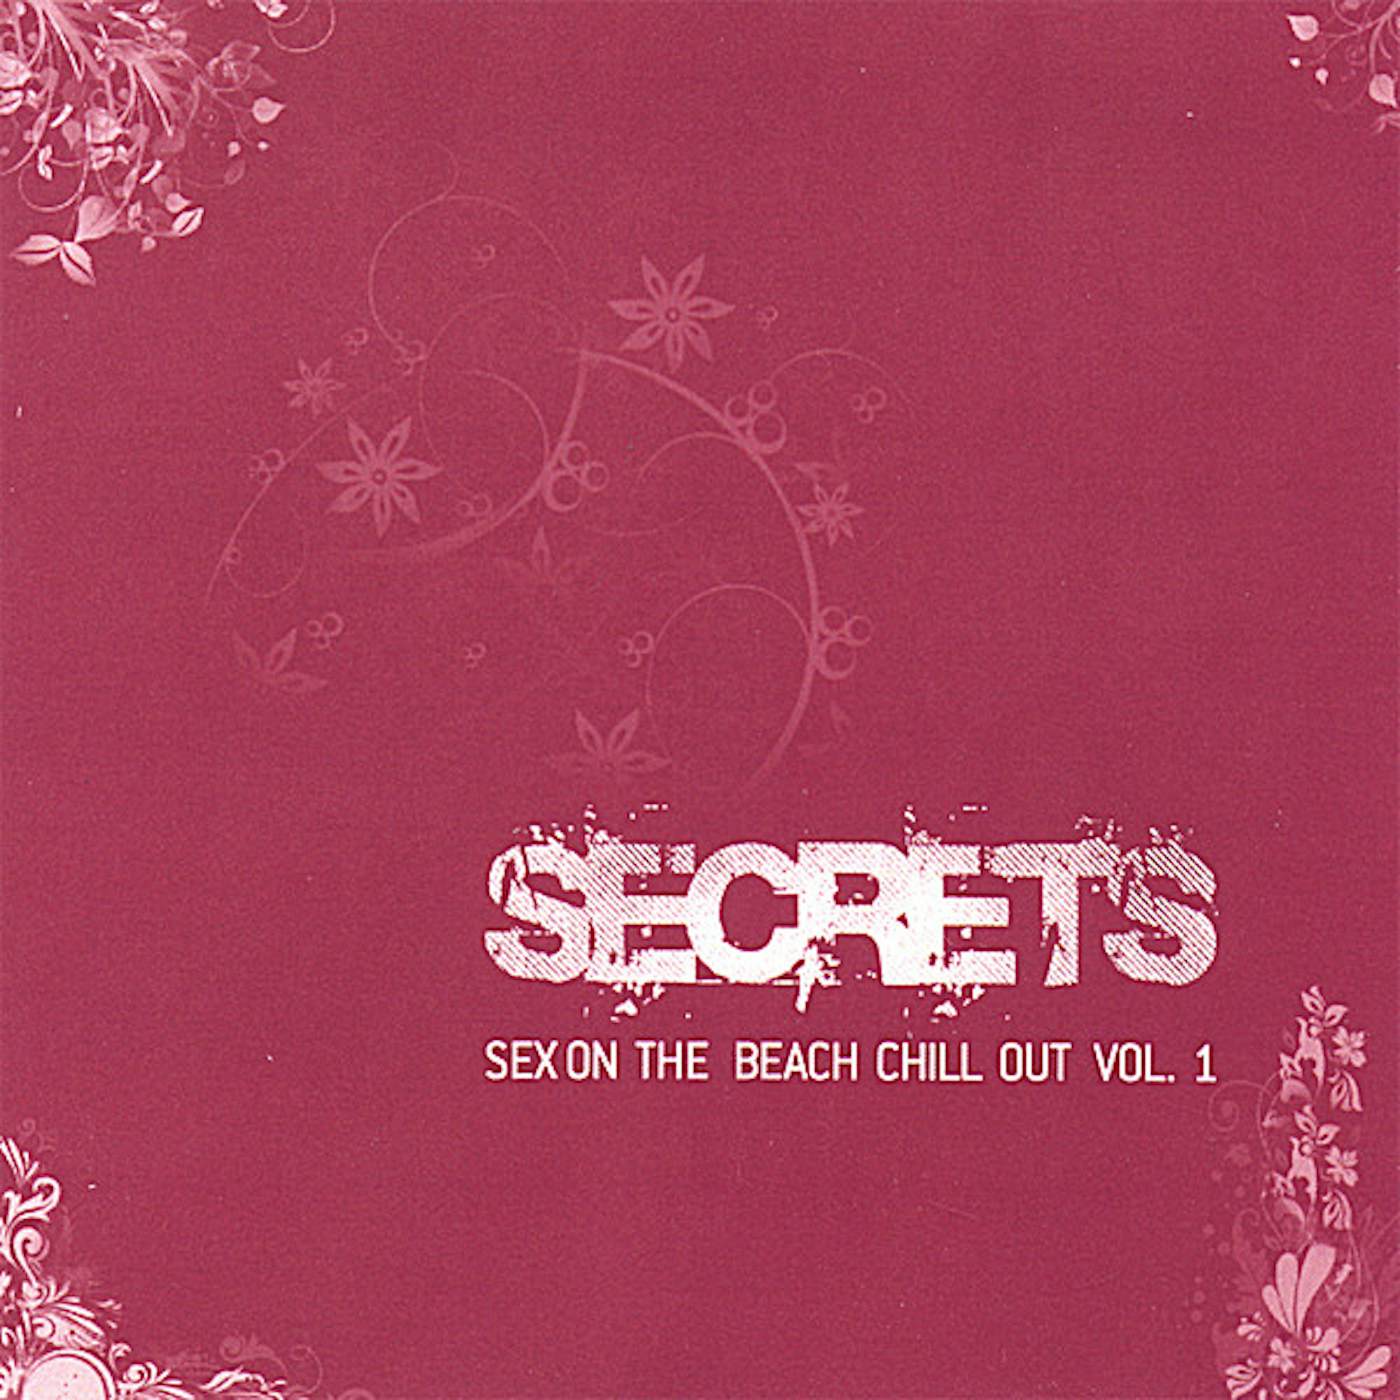 Secrets SEX ON THE BEACH CHILL OUT 1 CD